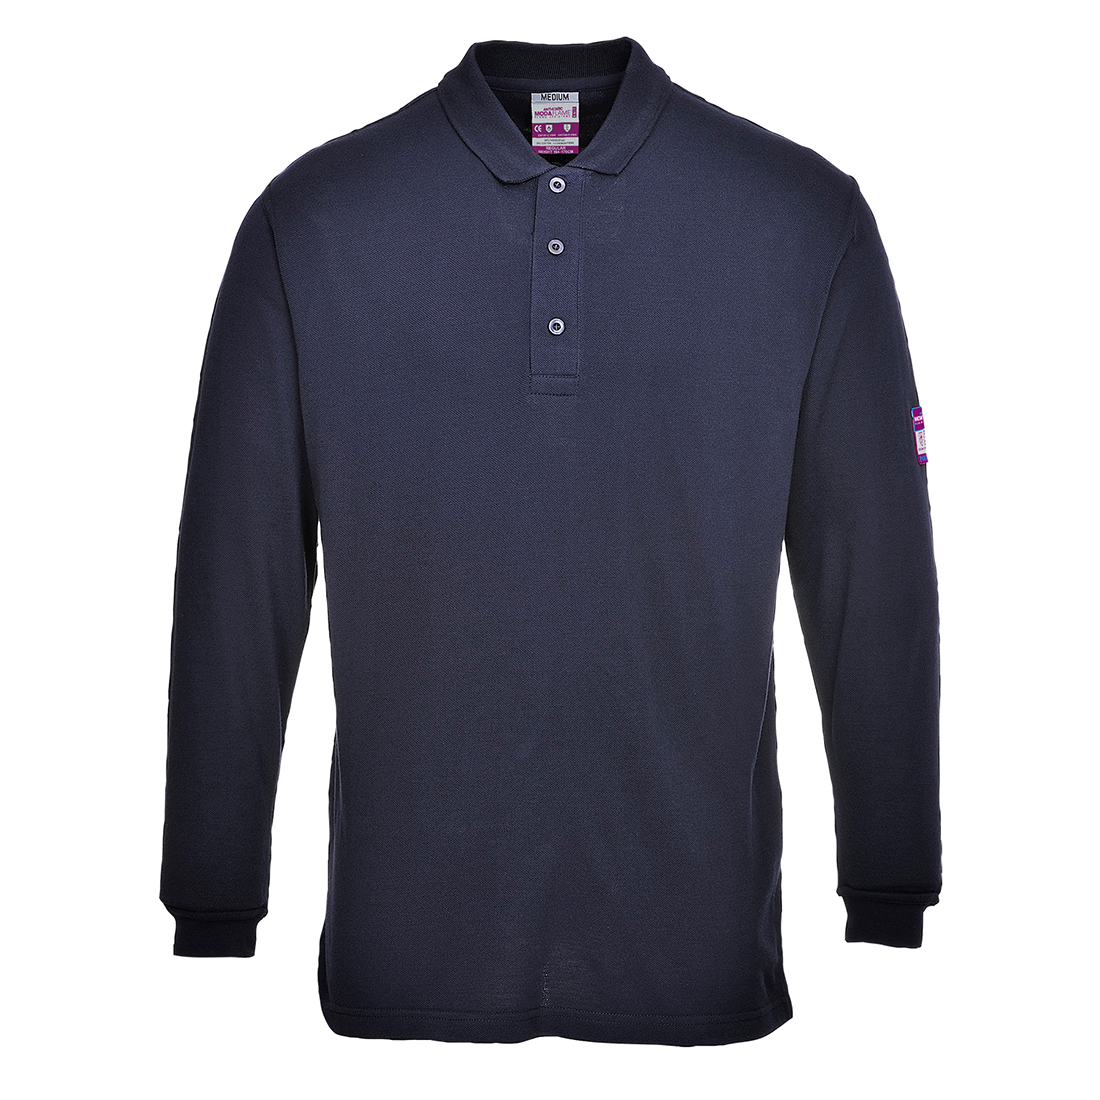 Flame Resistant Anti-Static Long Sleeve Polo Shirt - Navy